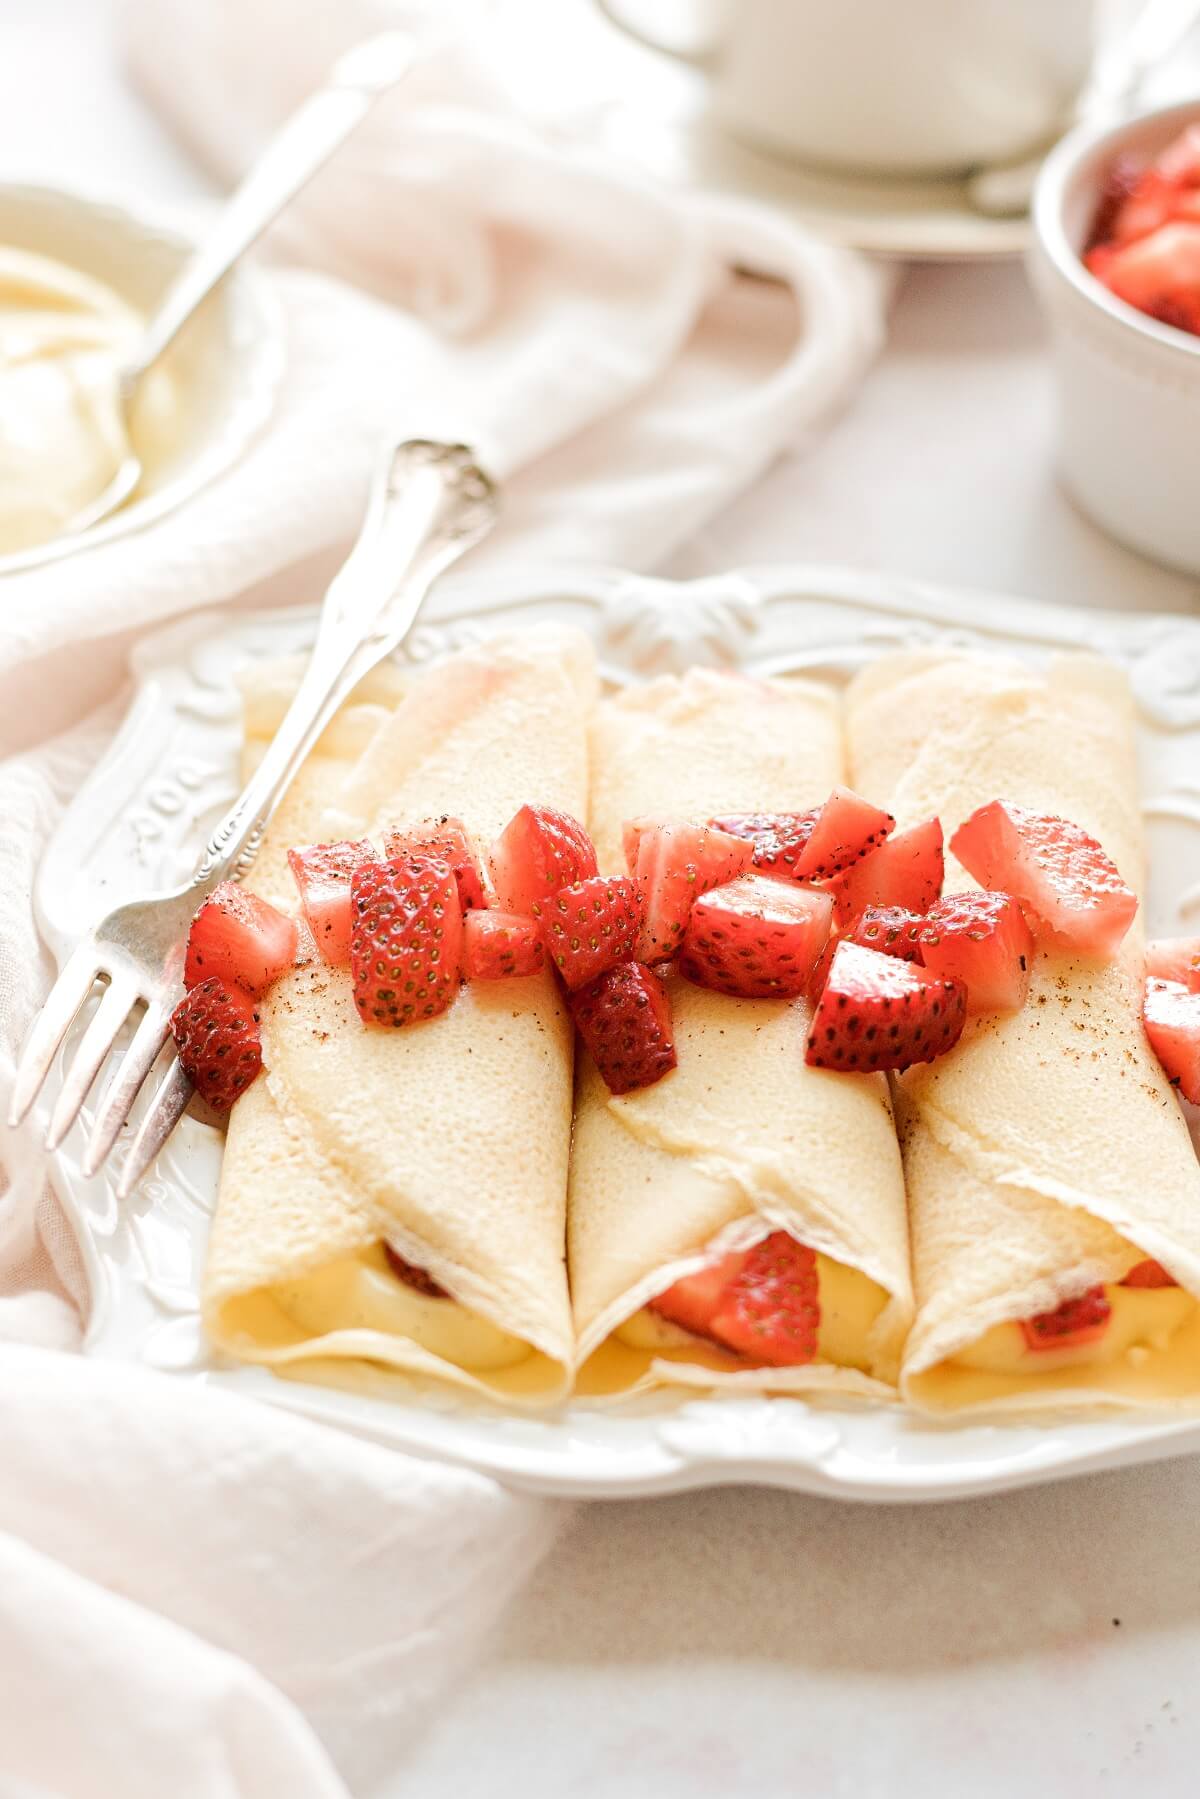 Three homemade crepes, topped with strawberries.